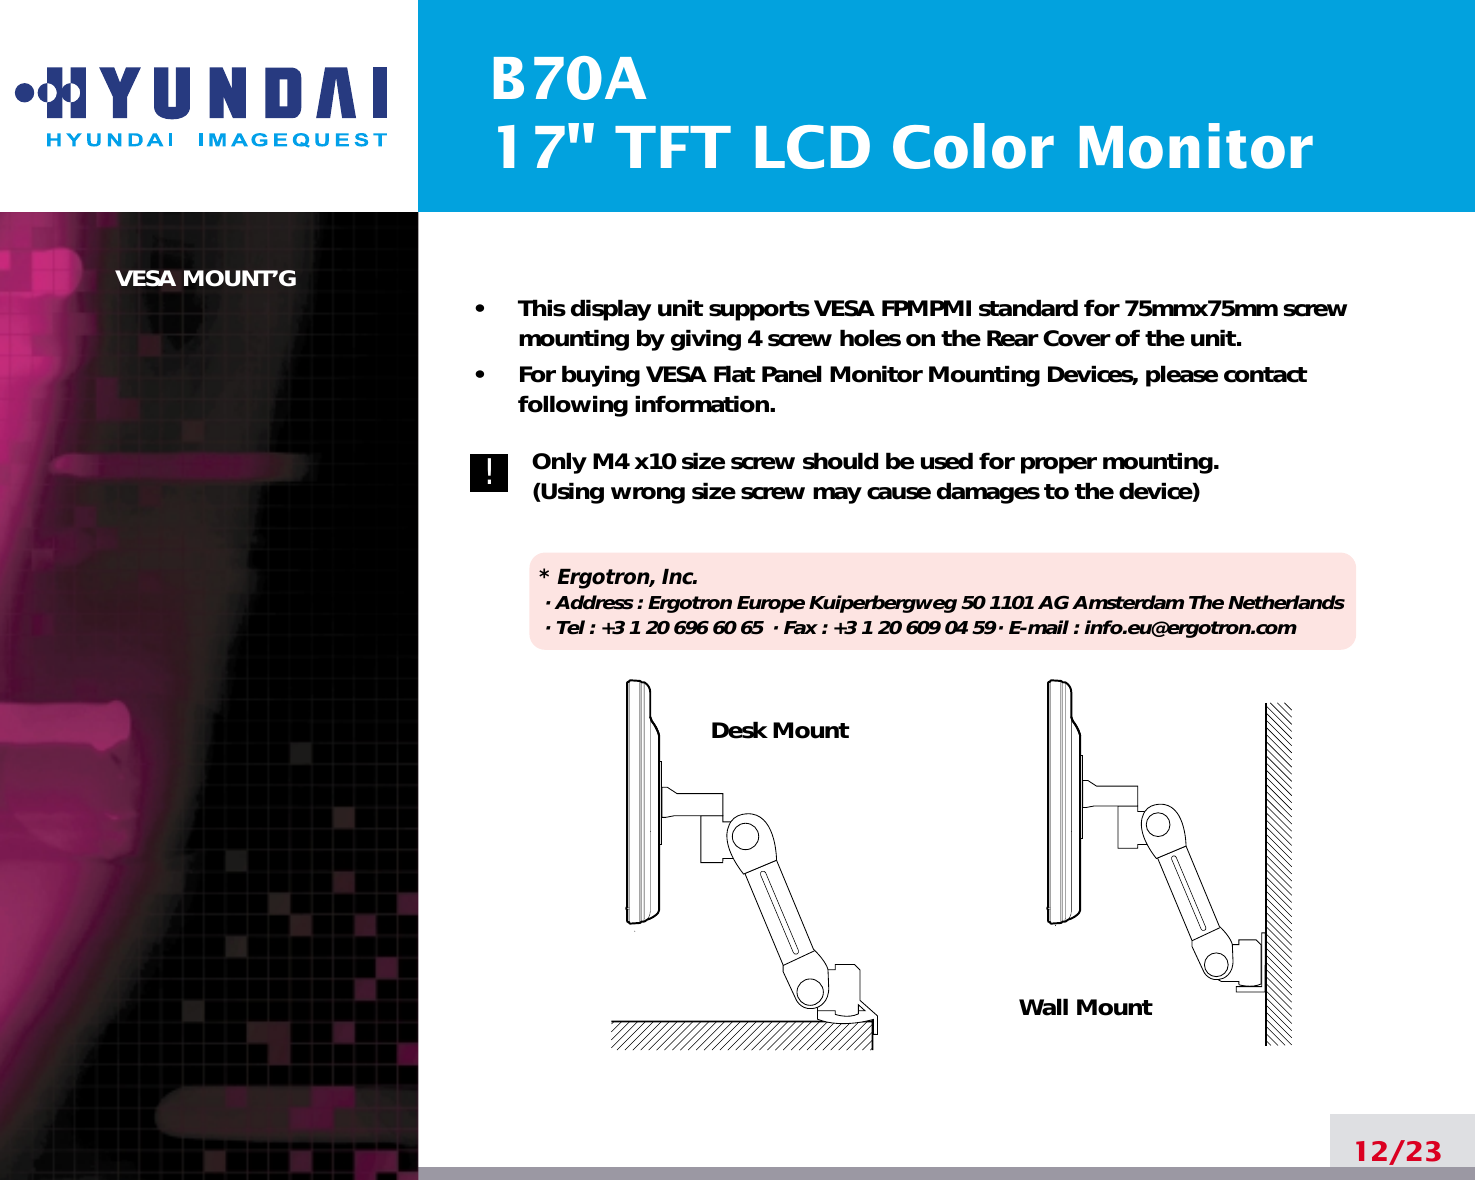 B70A17&quot; TFT LCD Color MonitorVESA MOUNT’G•     This display unit supports VESA FPMPMI standard for 75mmx75mm screwmounting by giving 4 screw holes on the Rear Cover of the unit.•     For buying VESA Flat Panel Monitor Mounting Devices, please contactfollowing information.Only M4 x10 size screw should be used for proper mounting.(Using wrong size screw may cause damages to the device)* Ergotron, Inc.· Address : Ergotron Europe Kuiperbergweg 50 1101 AG Amsterdam The Netherlands· Tel : +3 1 20 696 60 65 · Fax : +3 1 20 609 04 59· E-mail : info.eu@ergotron.com12/23Desk MountWall Mount!